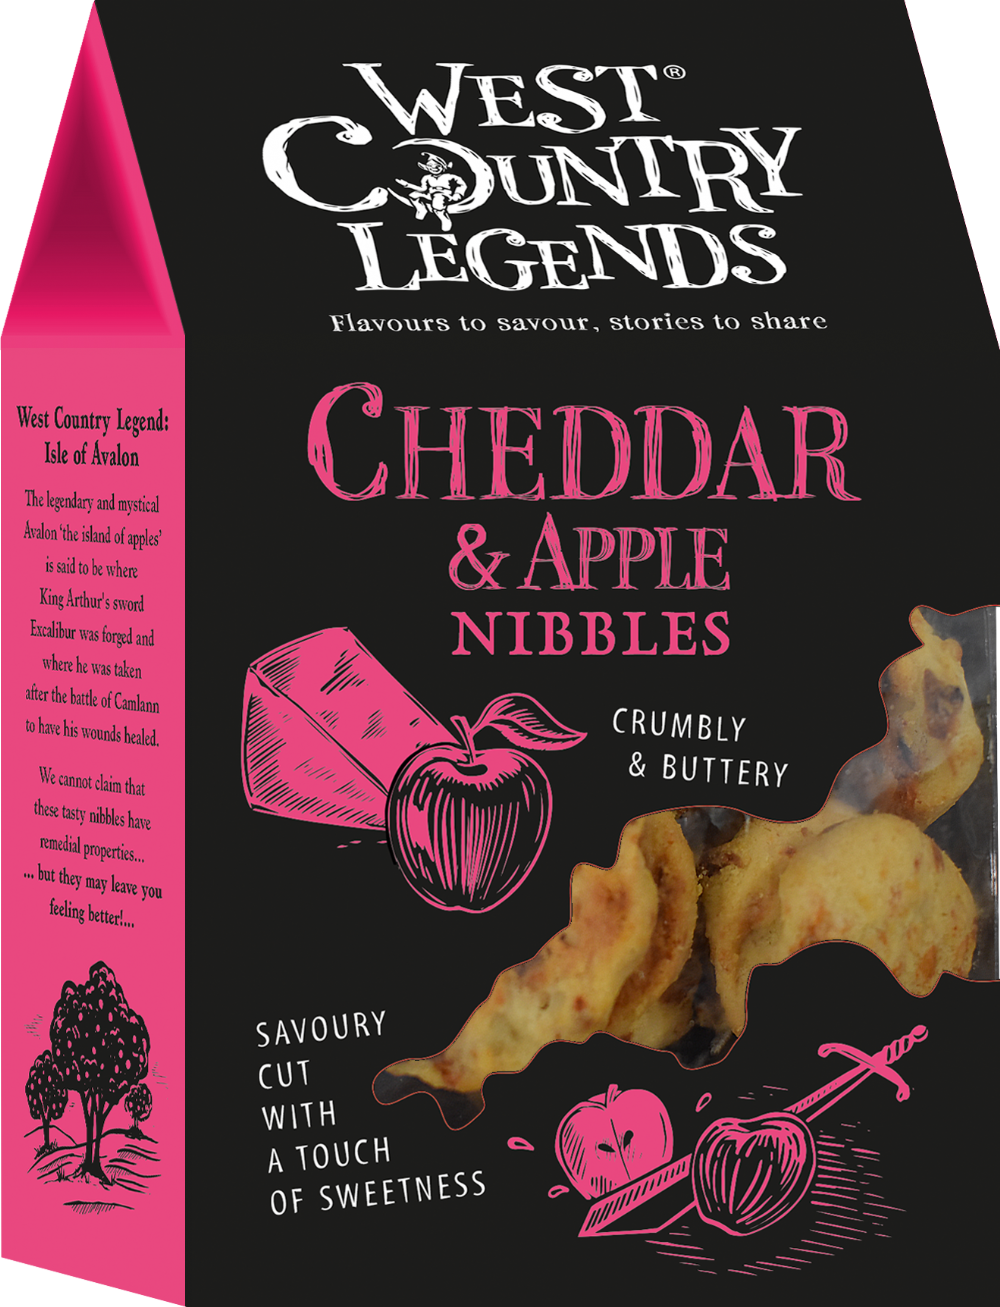 West Country Legends Cheddar & Apple Nibbles